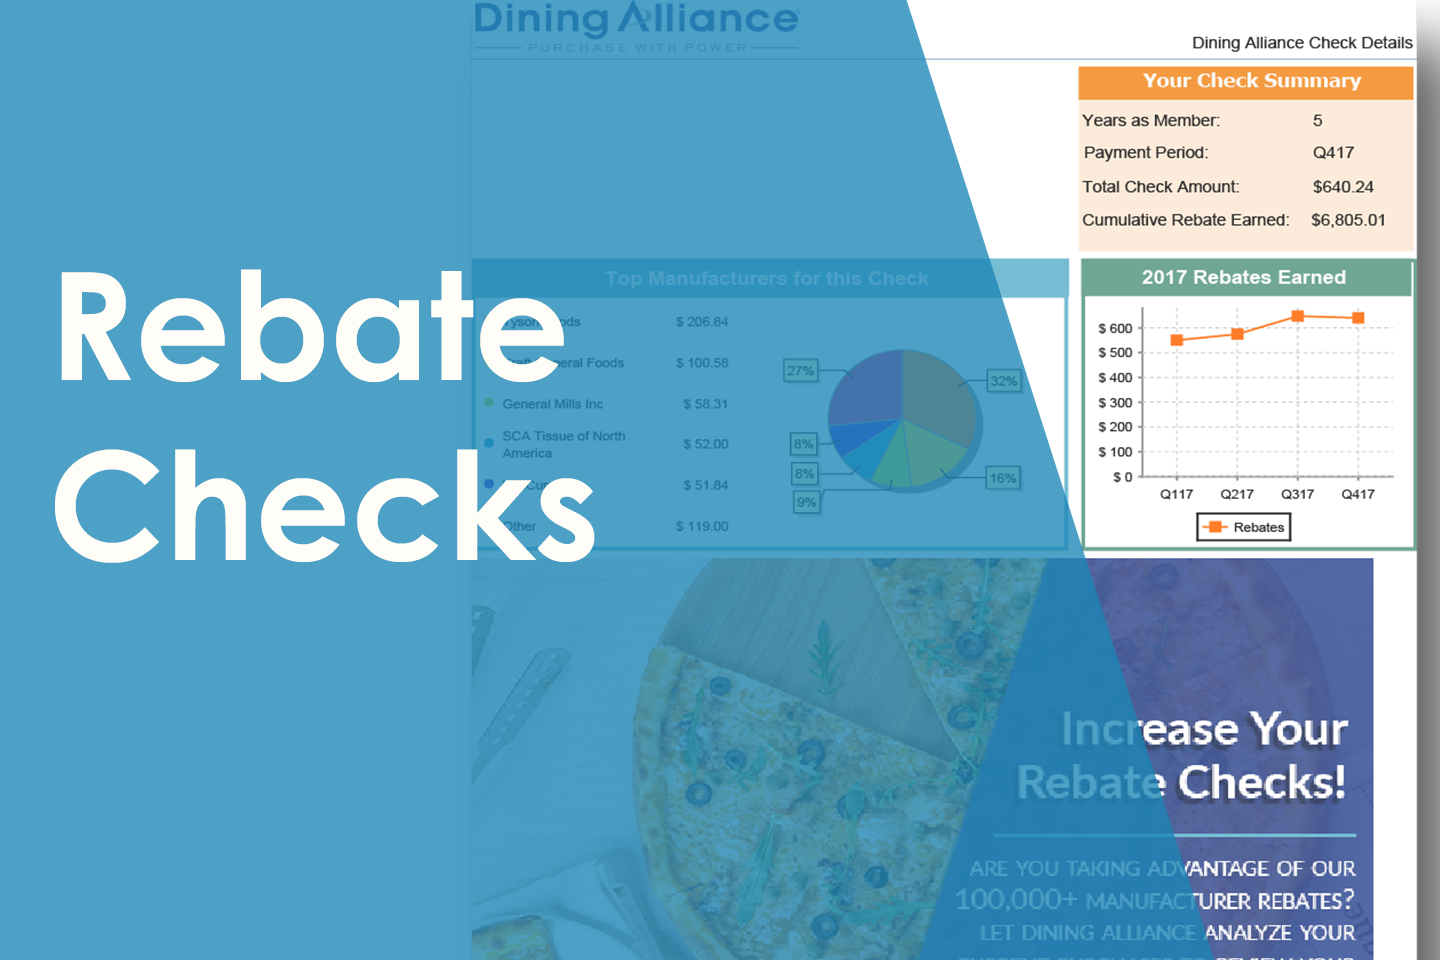 Provide rebate checks that you get to deliver and discuss Dining Alliance